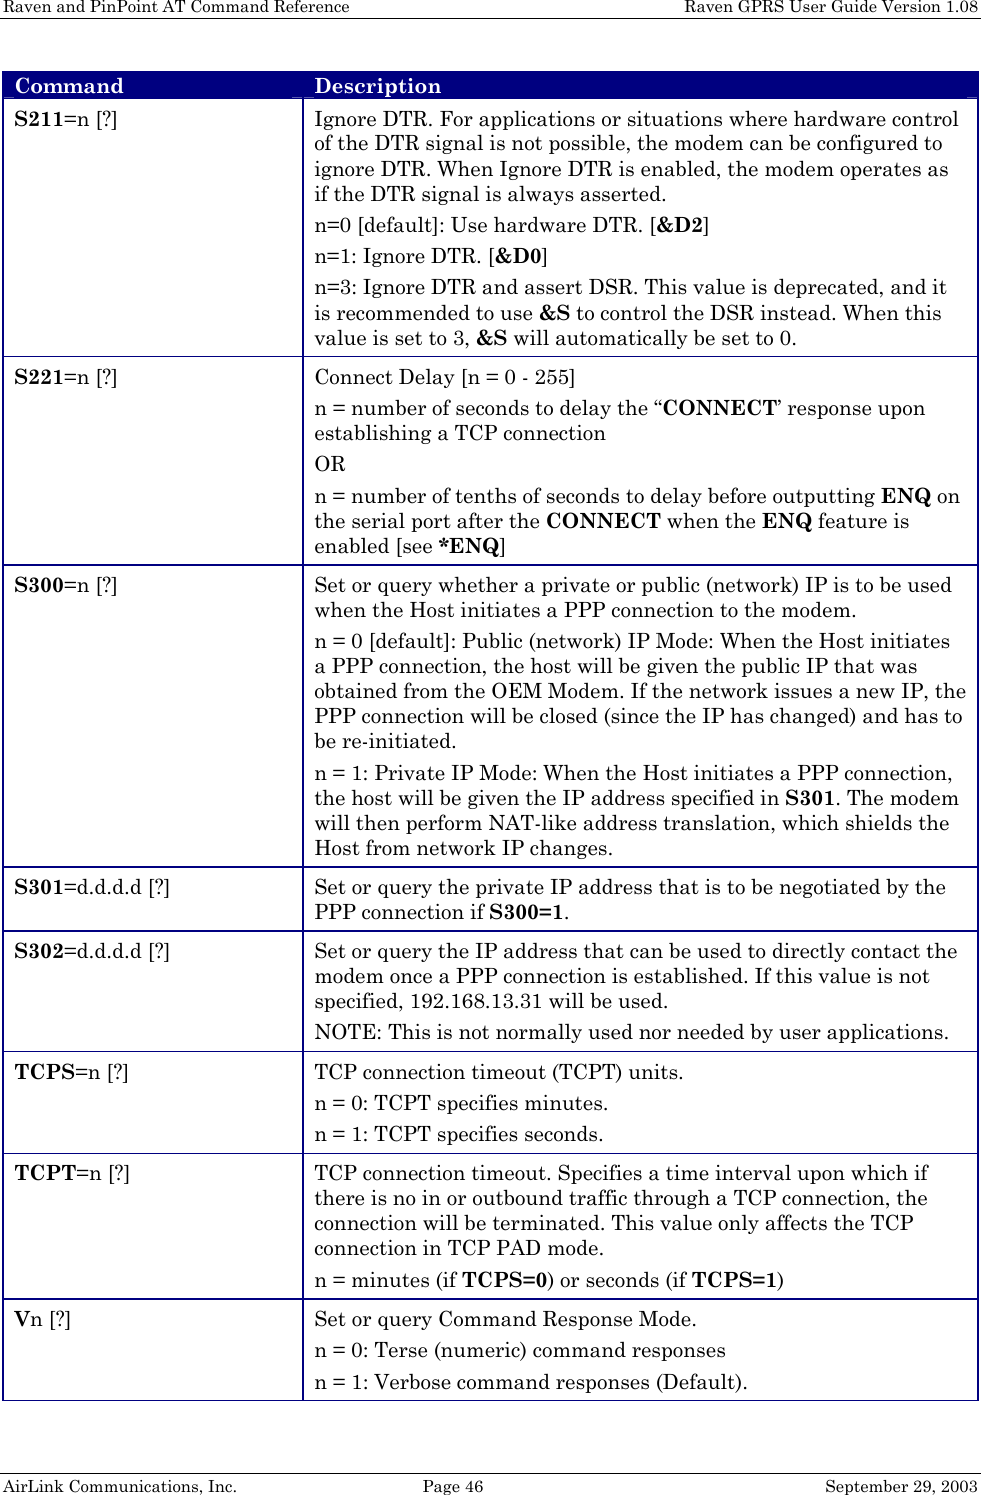 Raven and PinPoint AT Command Reference    Raven GPRS User Guide Version 1.08 AirLink Communications, Inc.  Page 46  September 29, 2003 Command Description S211=n [?] Ignore DTR. For applications or situations where hardware control of the DTR signal is not possible, the modem can be configured to ignore DTR. When Ignore DTR is enabled, the modem operates as if the DTR signal is always asserted. n=0 [default]: Use hardware DTR. [&amp;D2] n=1: Ignore DTR. [&amp;D0] n=3: Ignore DTR and assert DSR. This value is deprecated, and it is recommended to use &amp;S to control the DSR instead. When this value is set to 3, &amp;S will automatically be set to 0. S221=n [?] Connect Delay [n = 0 - 255] n = number of seconds to delay the “CONNECT’ response upon establishing a TCP connection OR n = number of tenths of seconds to delay before outputting ENQ on the serial port after the CONNECT when the ENQ feature is enabled [see *ENQ] S300=n [?] Set or query whether a private or public (network) IP is to be used when the Host initiates a PPP connection to the modem. n = 0 [default]: Public (network) IP Mode: When the Host initiates a PPP connection, the host will be given the public IP that was obtained from the OEM Modem. If the network issues a new IP, the PPP connection will be closed (since the IP has changed) and has to be re-initiated. n = 1: Private IP Mode: When the Host initiates a PPP connection, the host will be given the IP address specified in S301. The modem will then perform NAT-like address translation, which shields the Host from network IP changes. S301=d.d.d.d [?] Set or query the private IP address that is to be negotiated by the PPP connection if S300=1. S302=d.d.d.d [?] Set or query the IP address that can be used to directly contact the modem once a PPP connection is established. If this value is not specified, 192.168.13.31 will be used. NOTE: This is not normally used nor needed by user applications. TCPS=n [?] TCP connection timeout (TCPT) units. n = 0: TCPT specifies minutes. n = 1: TCPT specifies seconds. TCPT=n [?] TCP connection timeout. Specifies a time interval upon which if there is no in or outbound traffic through a TCP connection, the connection will be terminated. This value only affects the TCP connection in TCP PAD mode. n = minutes (if TCPS=0) or seconds (if TCPS=1) Vn [?] Set or query Command Response Mode. n = 0: Terse (numeric) command responses n = 1: Verbose command responses (Default). 